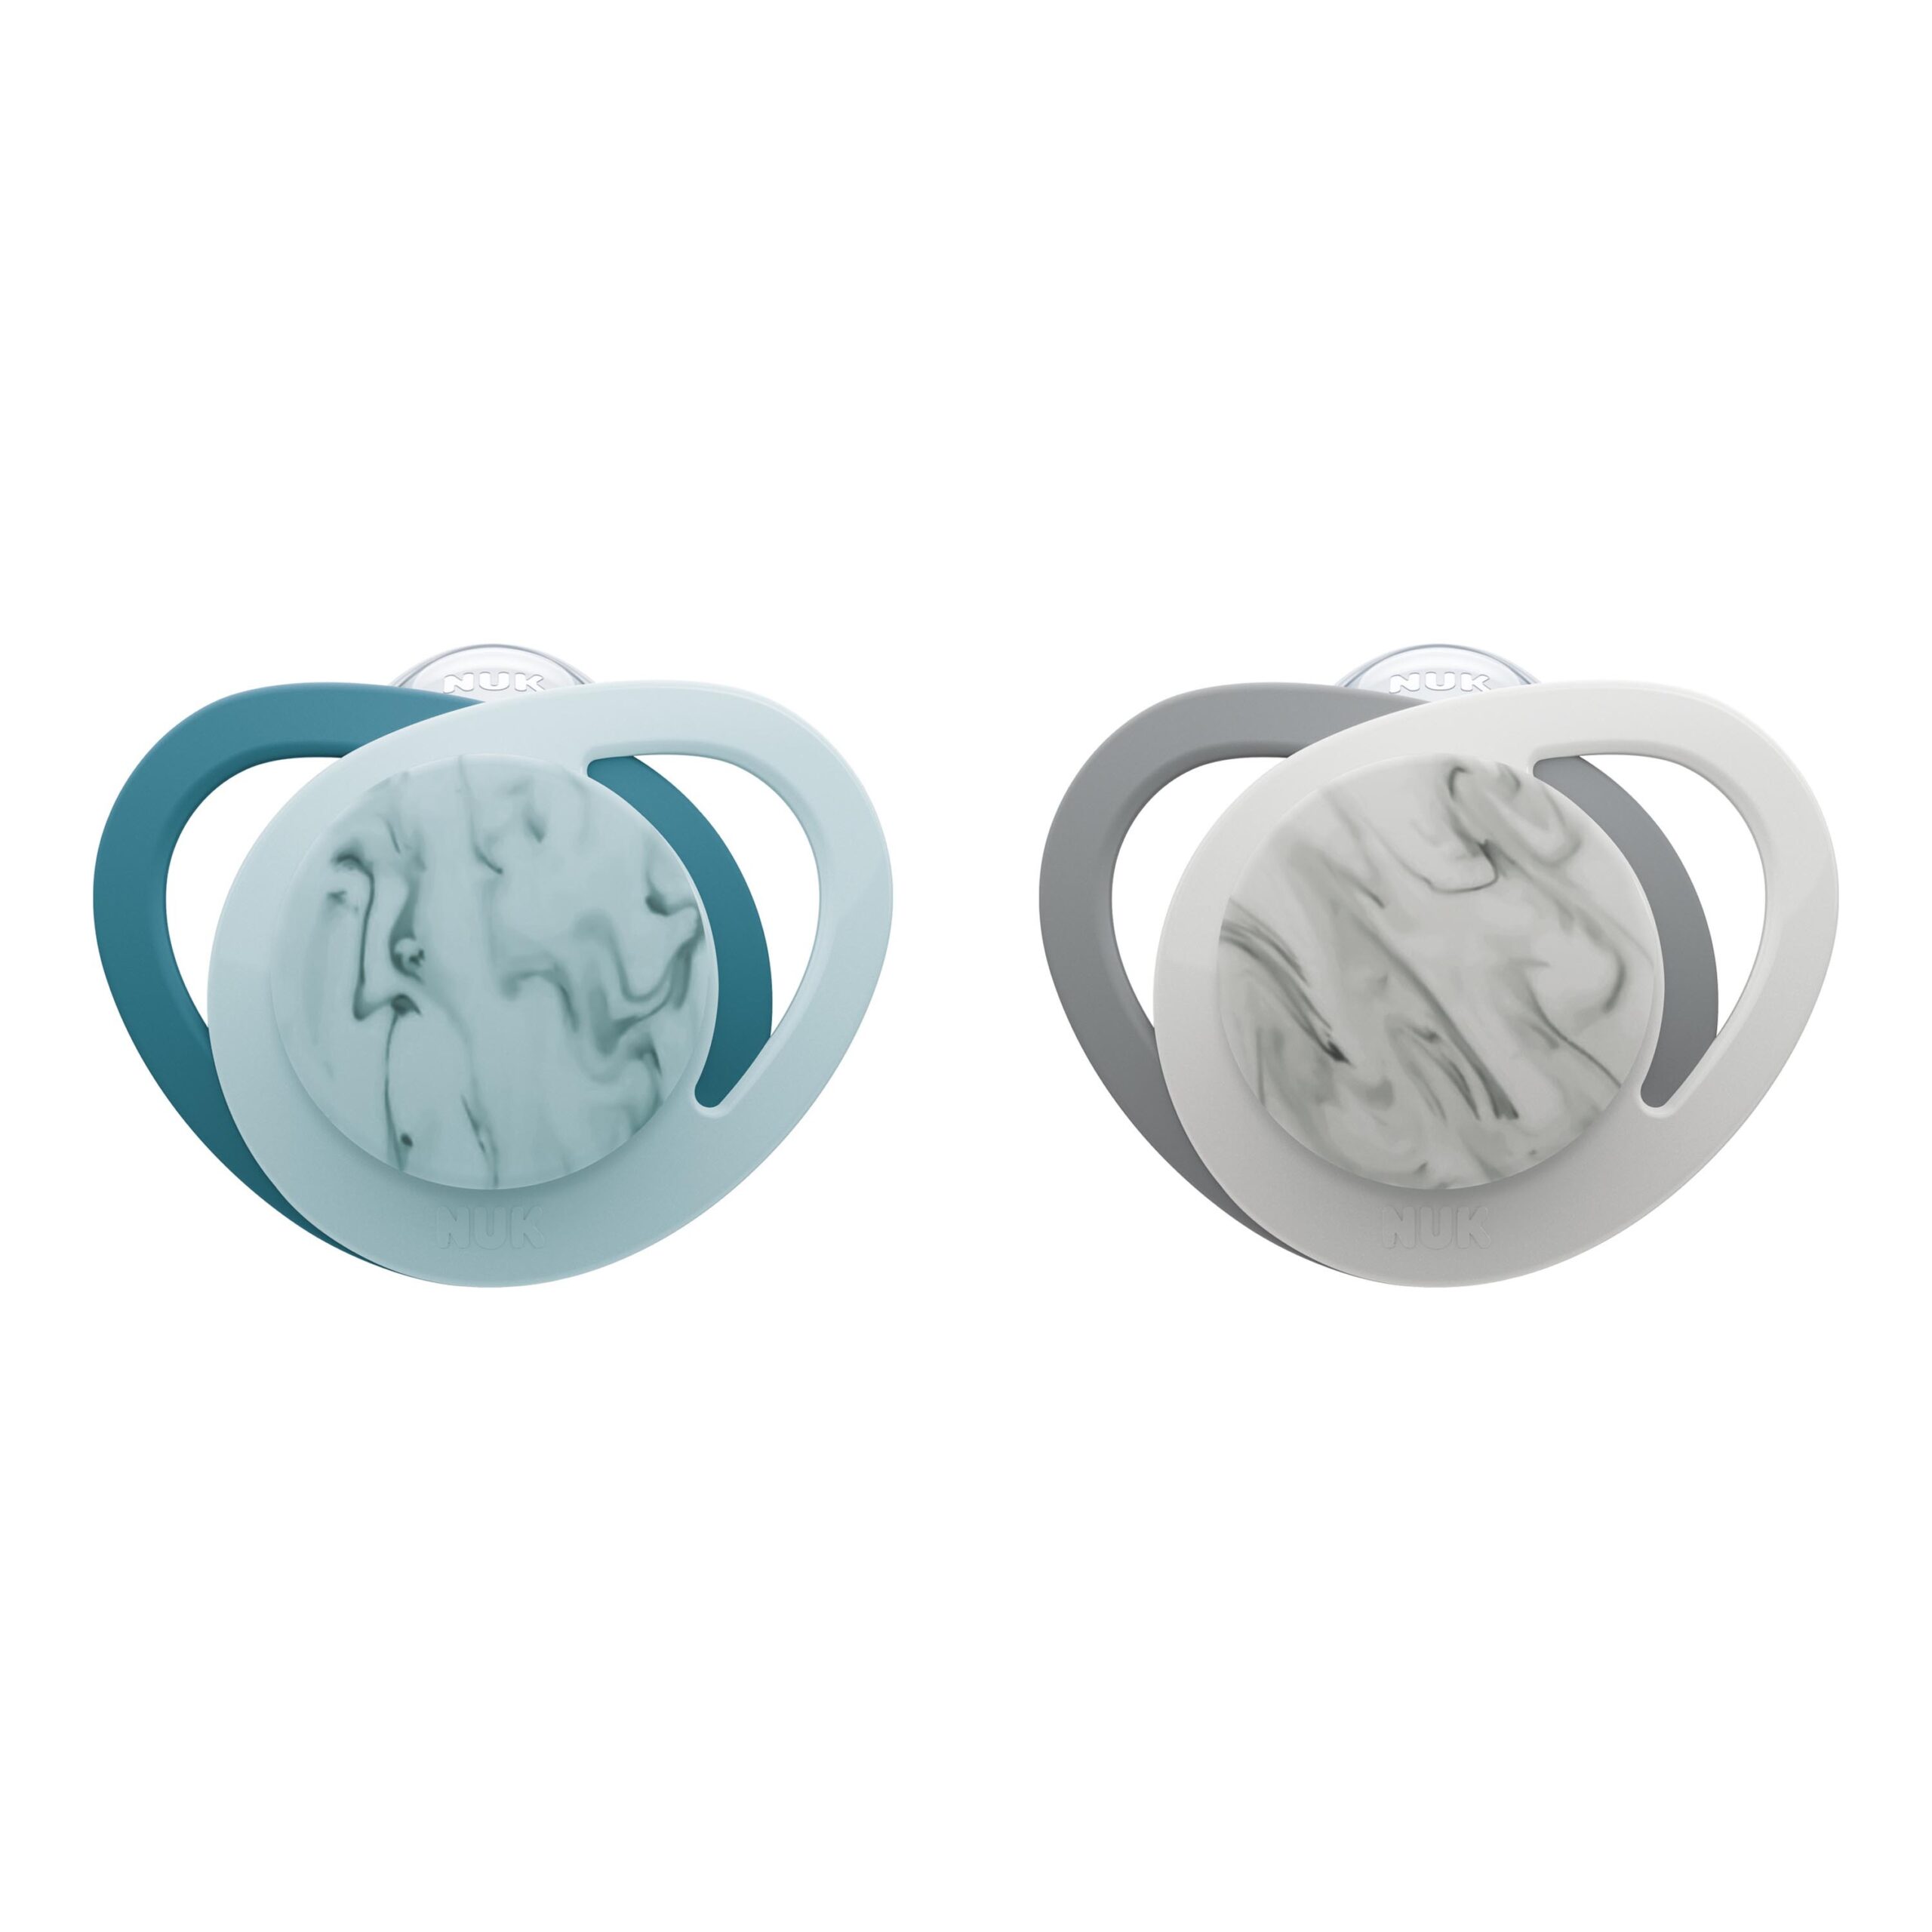 NFN Next Gen Classic Pacifier, 2PK Product Image 1 of 11